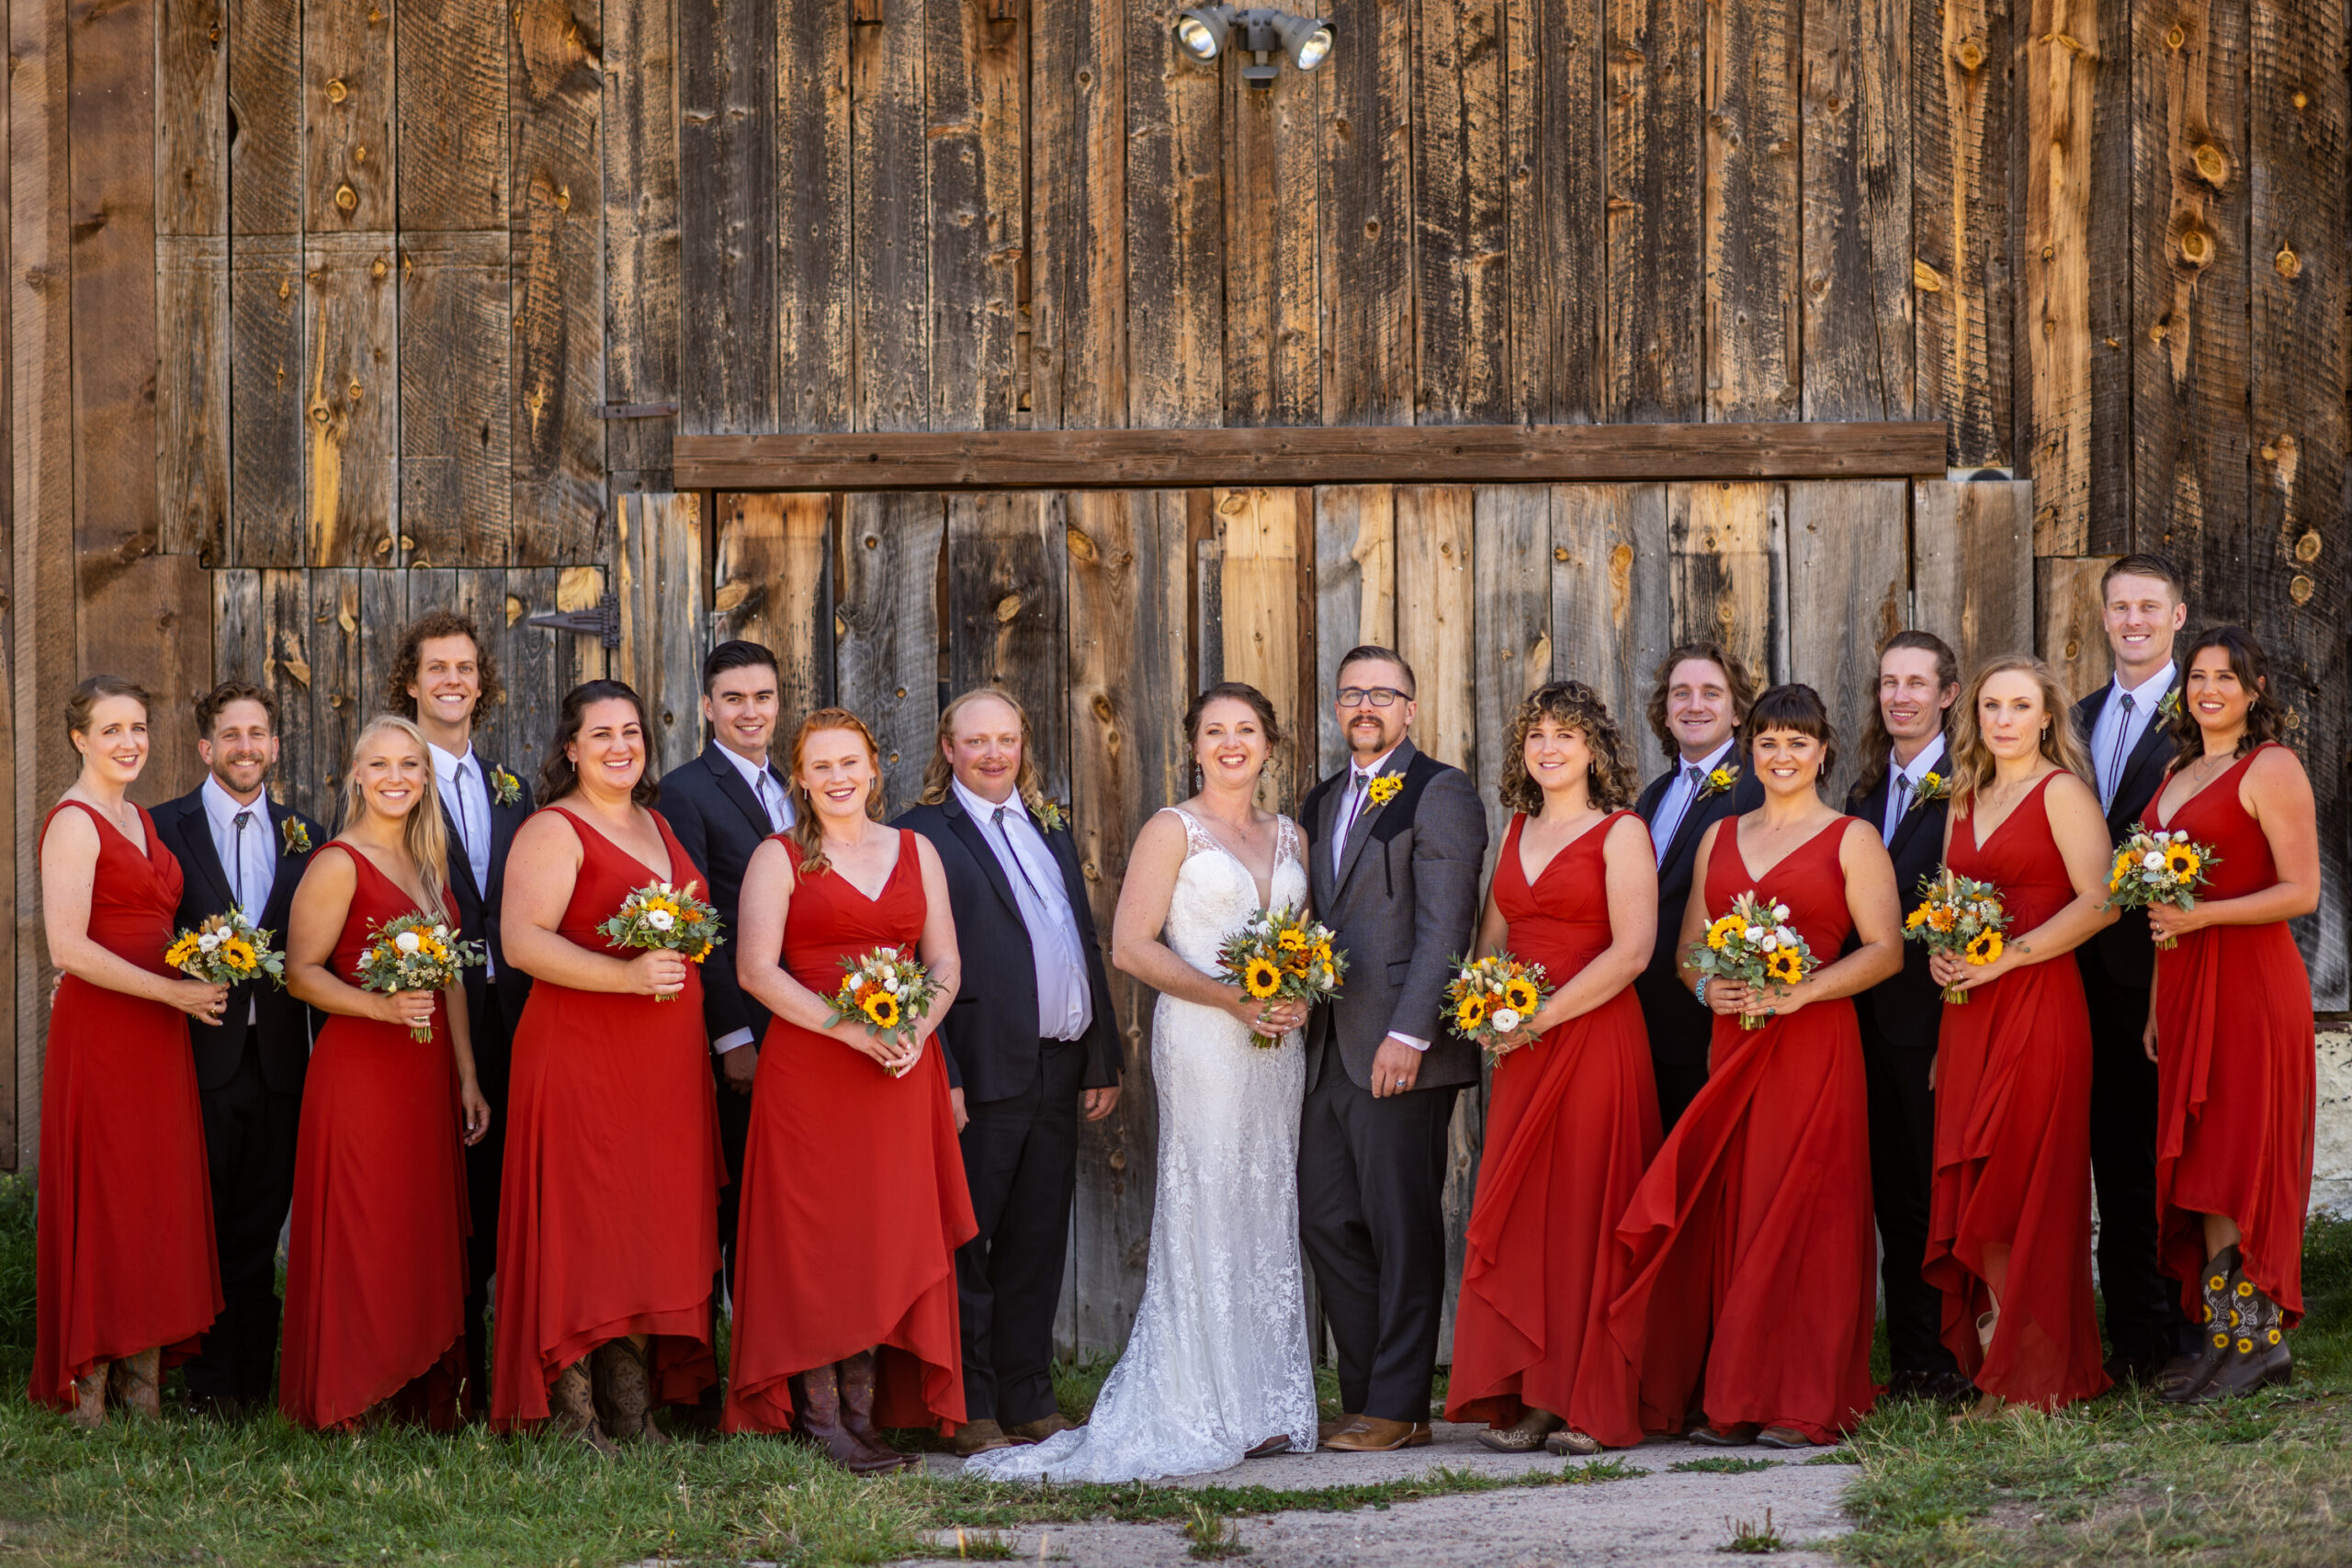 The bridal party pose for a photo in front of a barn at Three Sisters Park in Evergreen, Colorado.